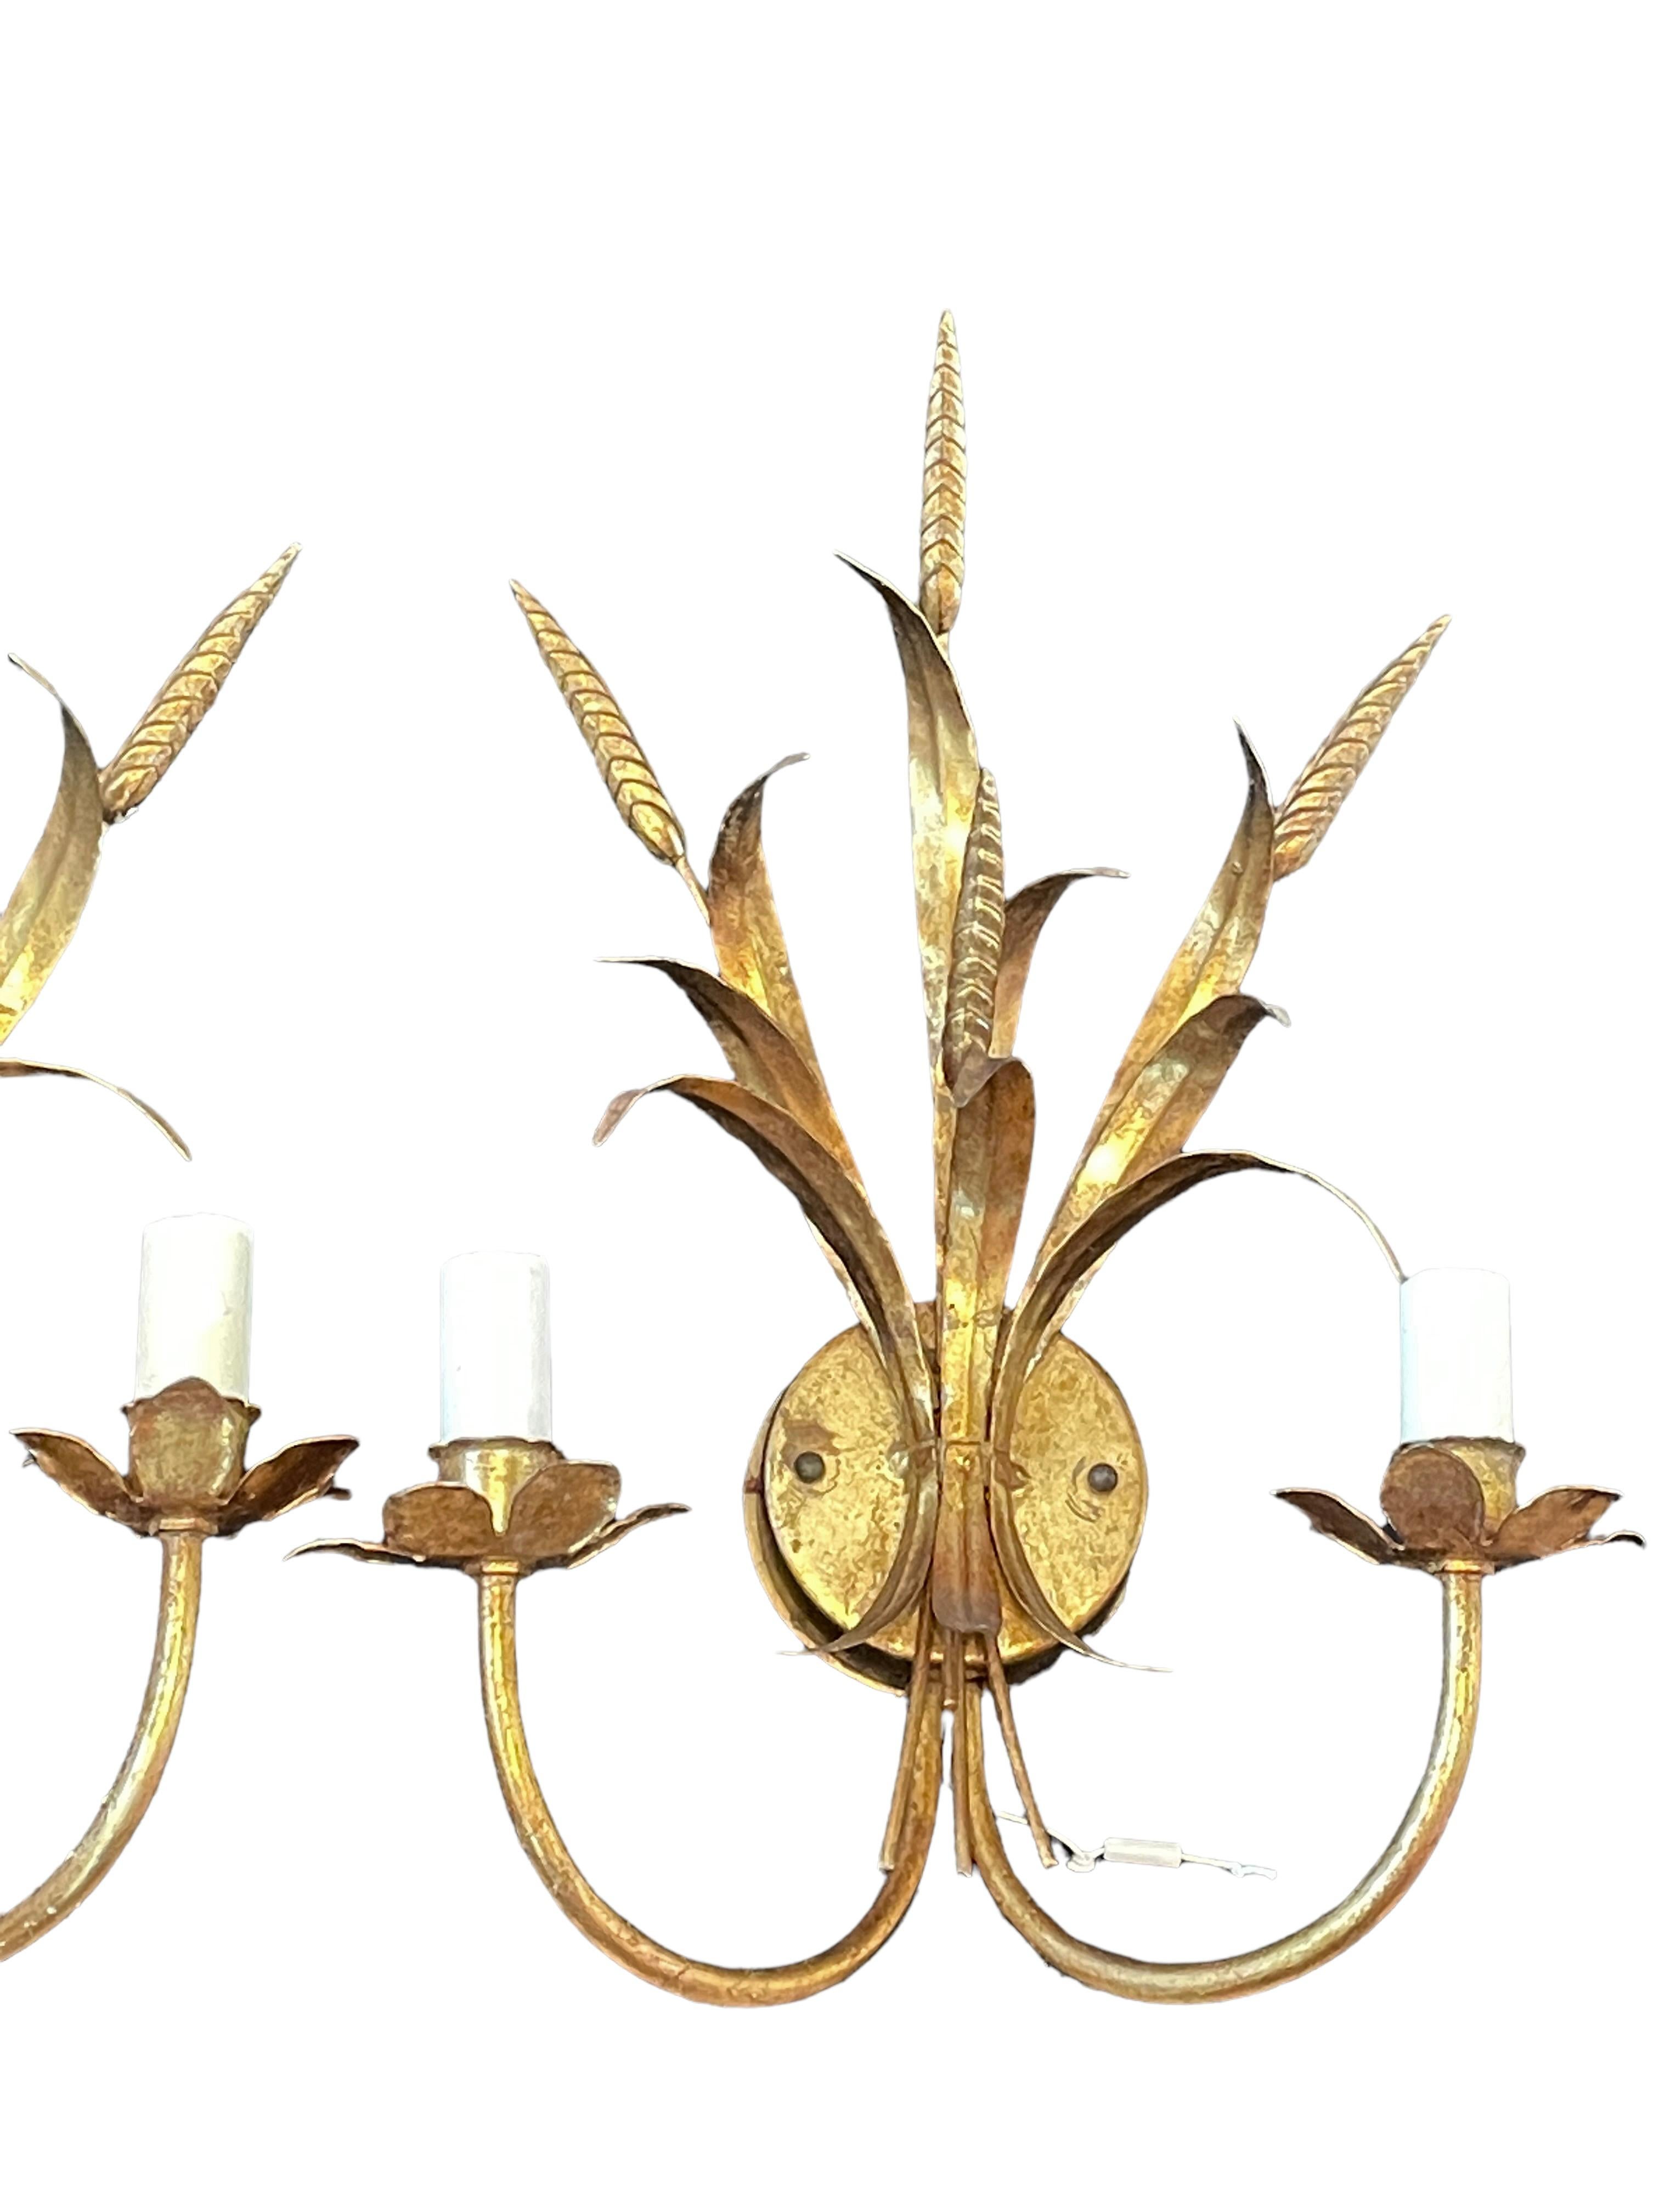 Pair of Wheat Sheaf Two-Light Gilded Tole Sconces by Hans Kögl, Germany, 1970s For Sale 2